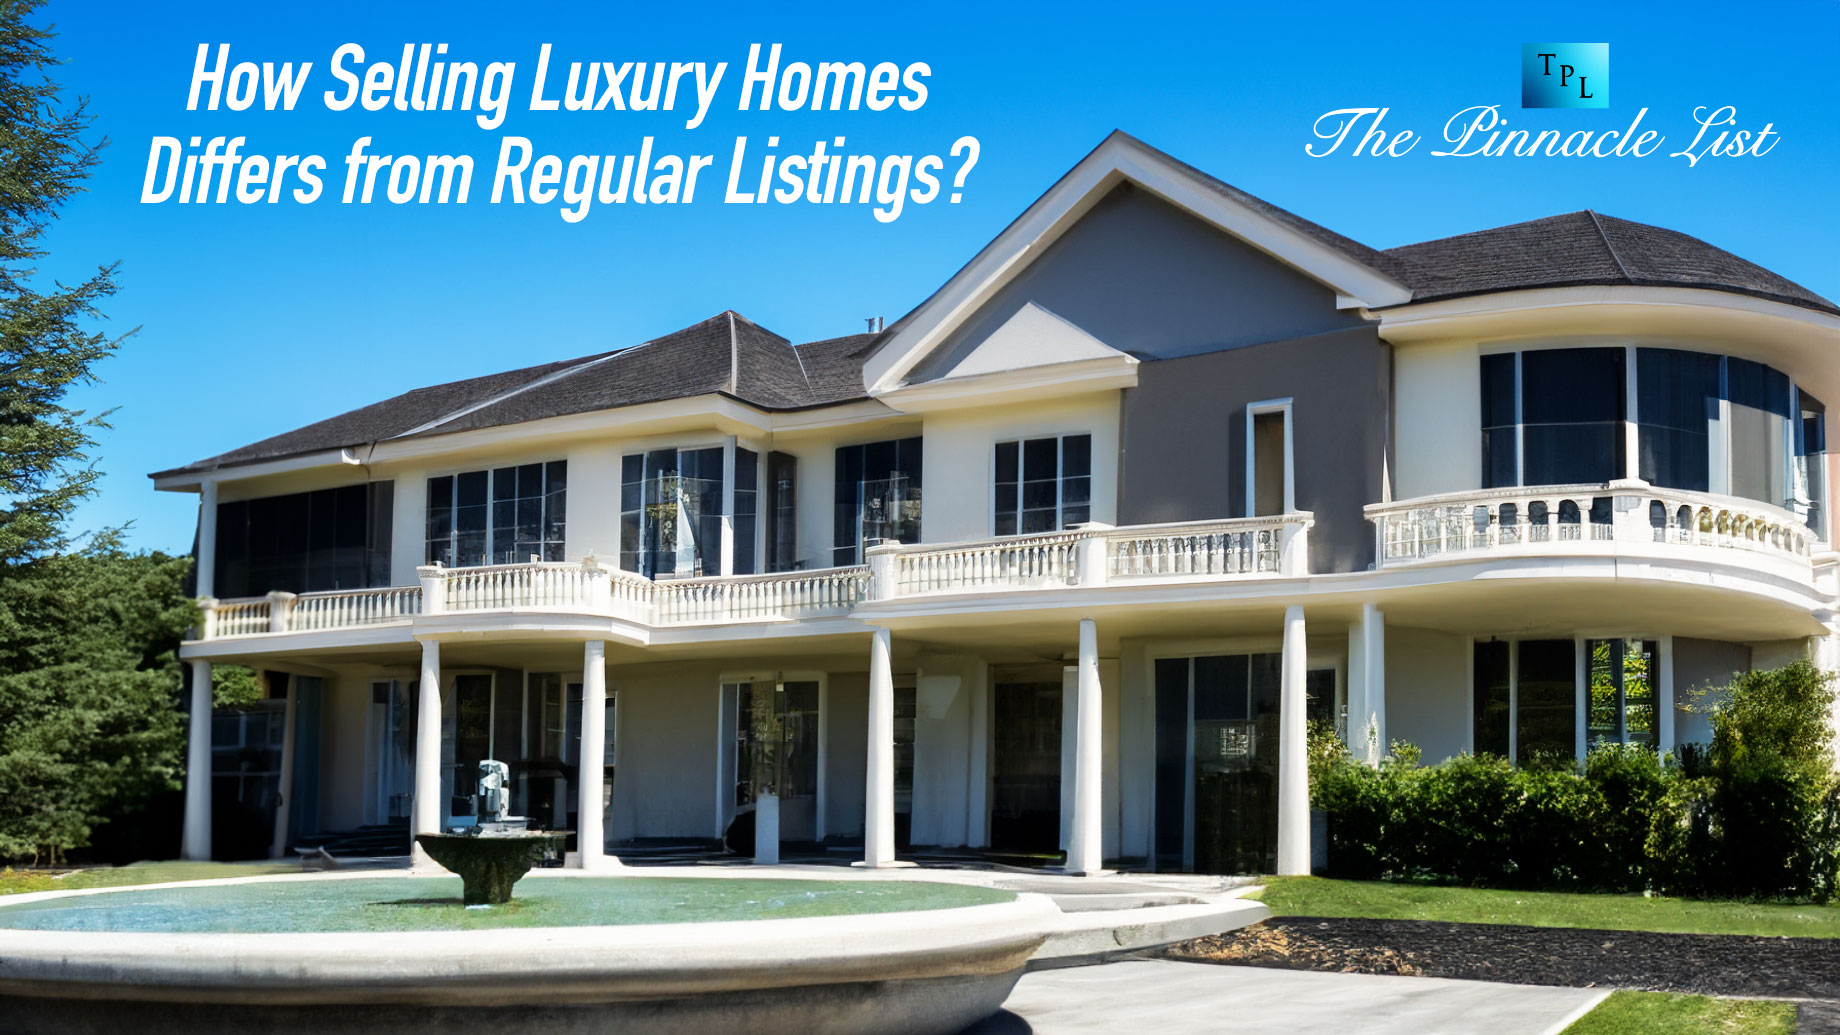 How Selling Luxury Homes Differs from Regular Listings?